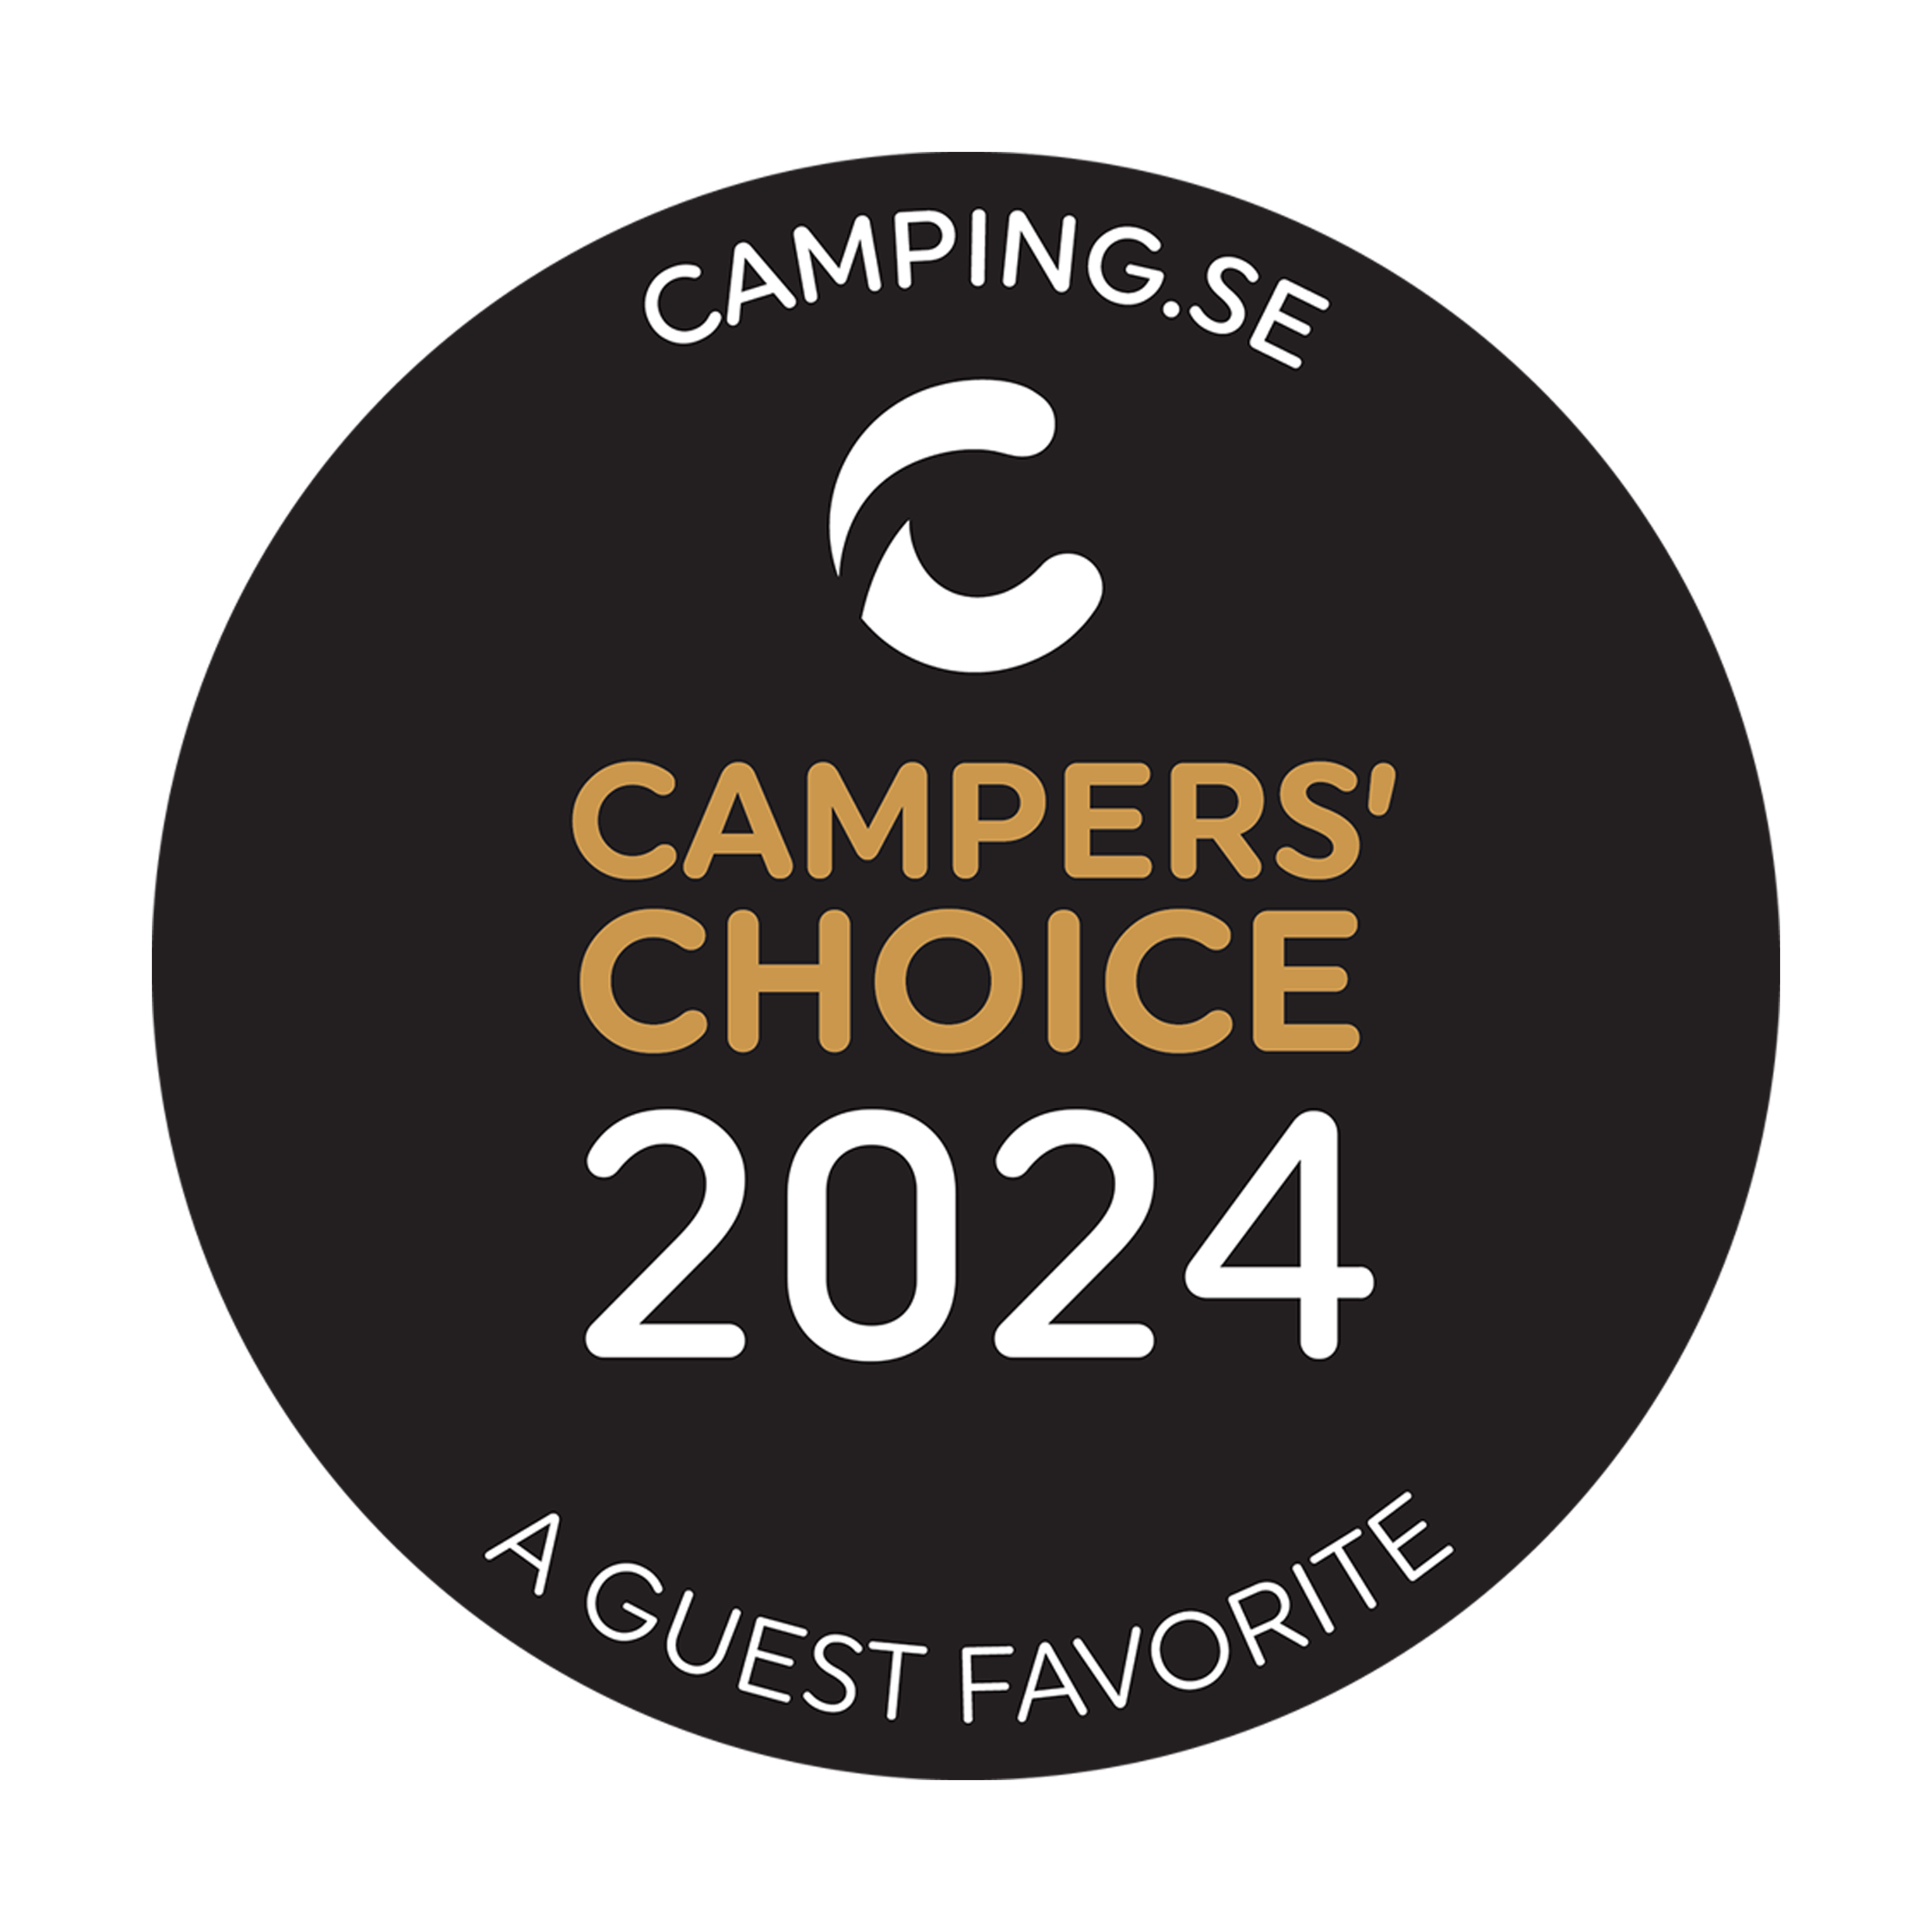 Camping.se Campers' Choice